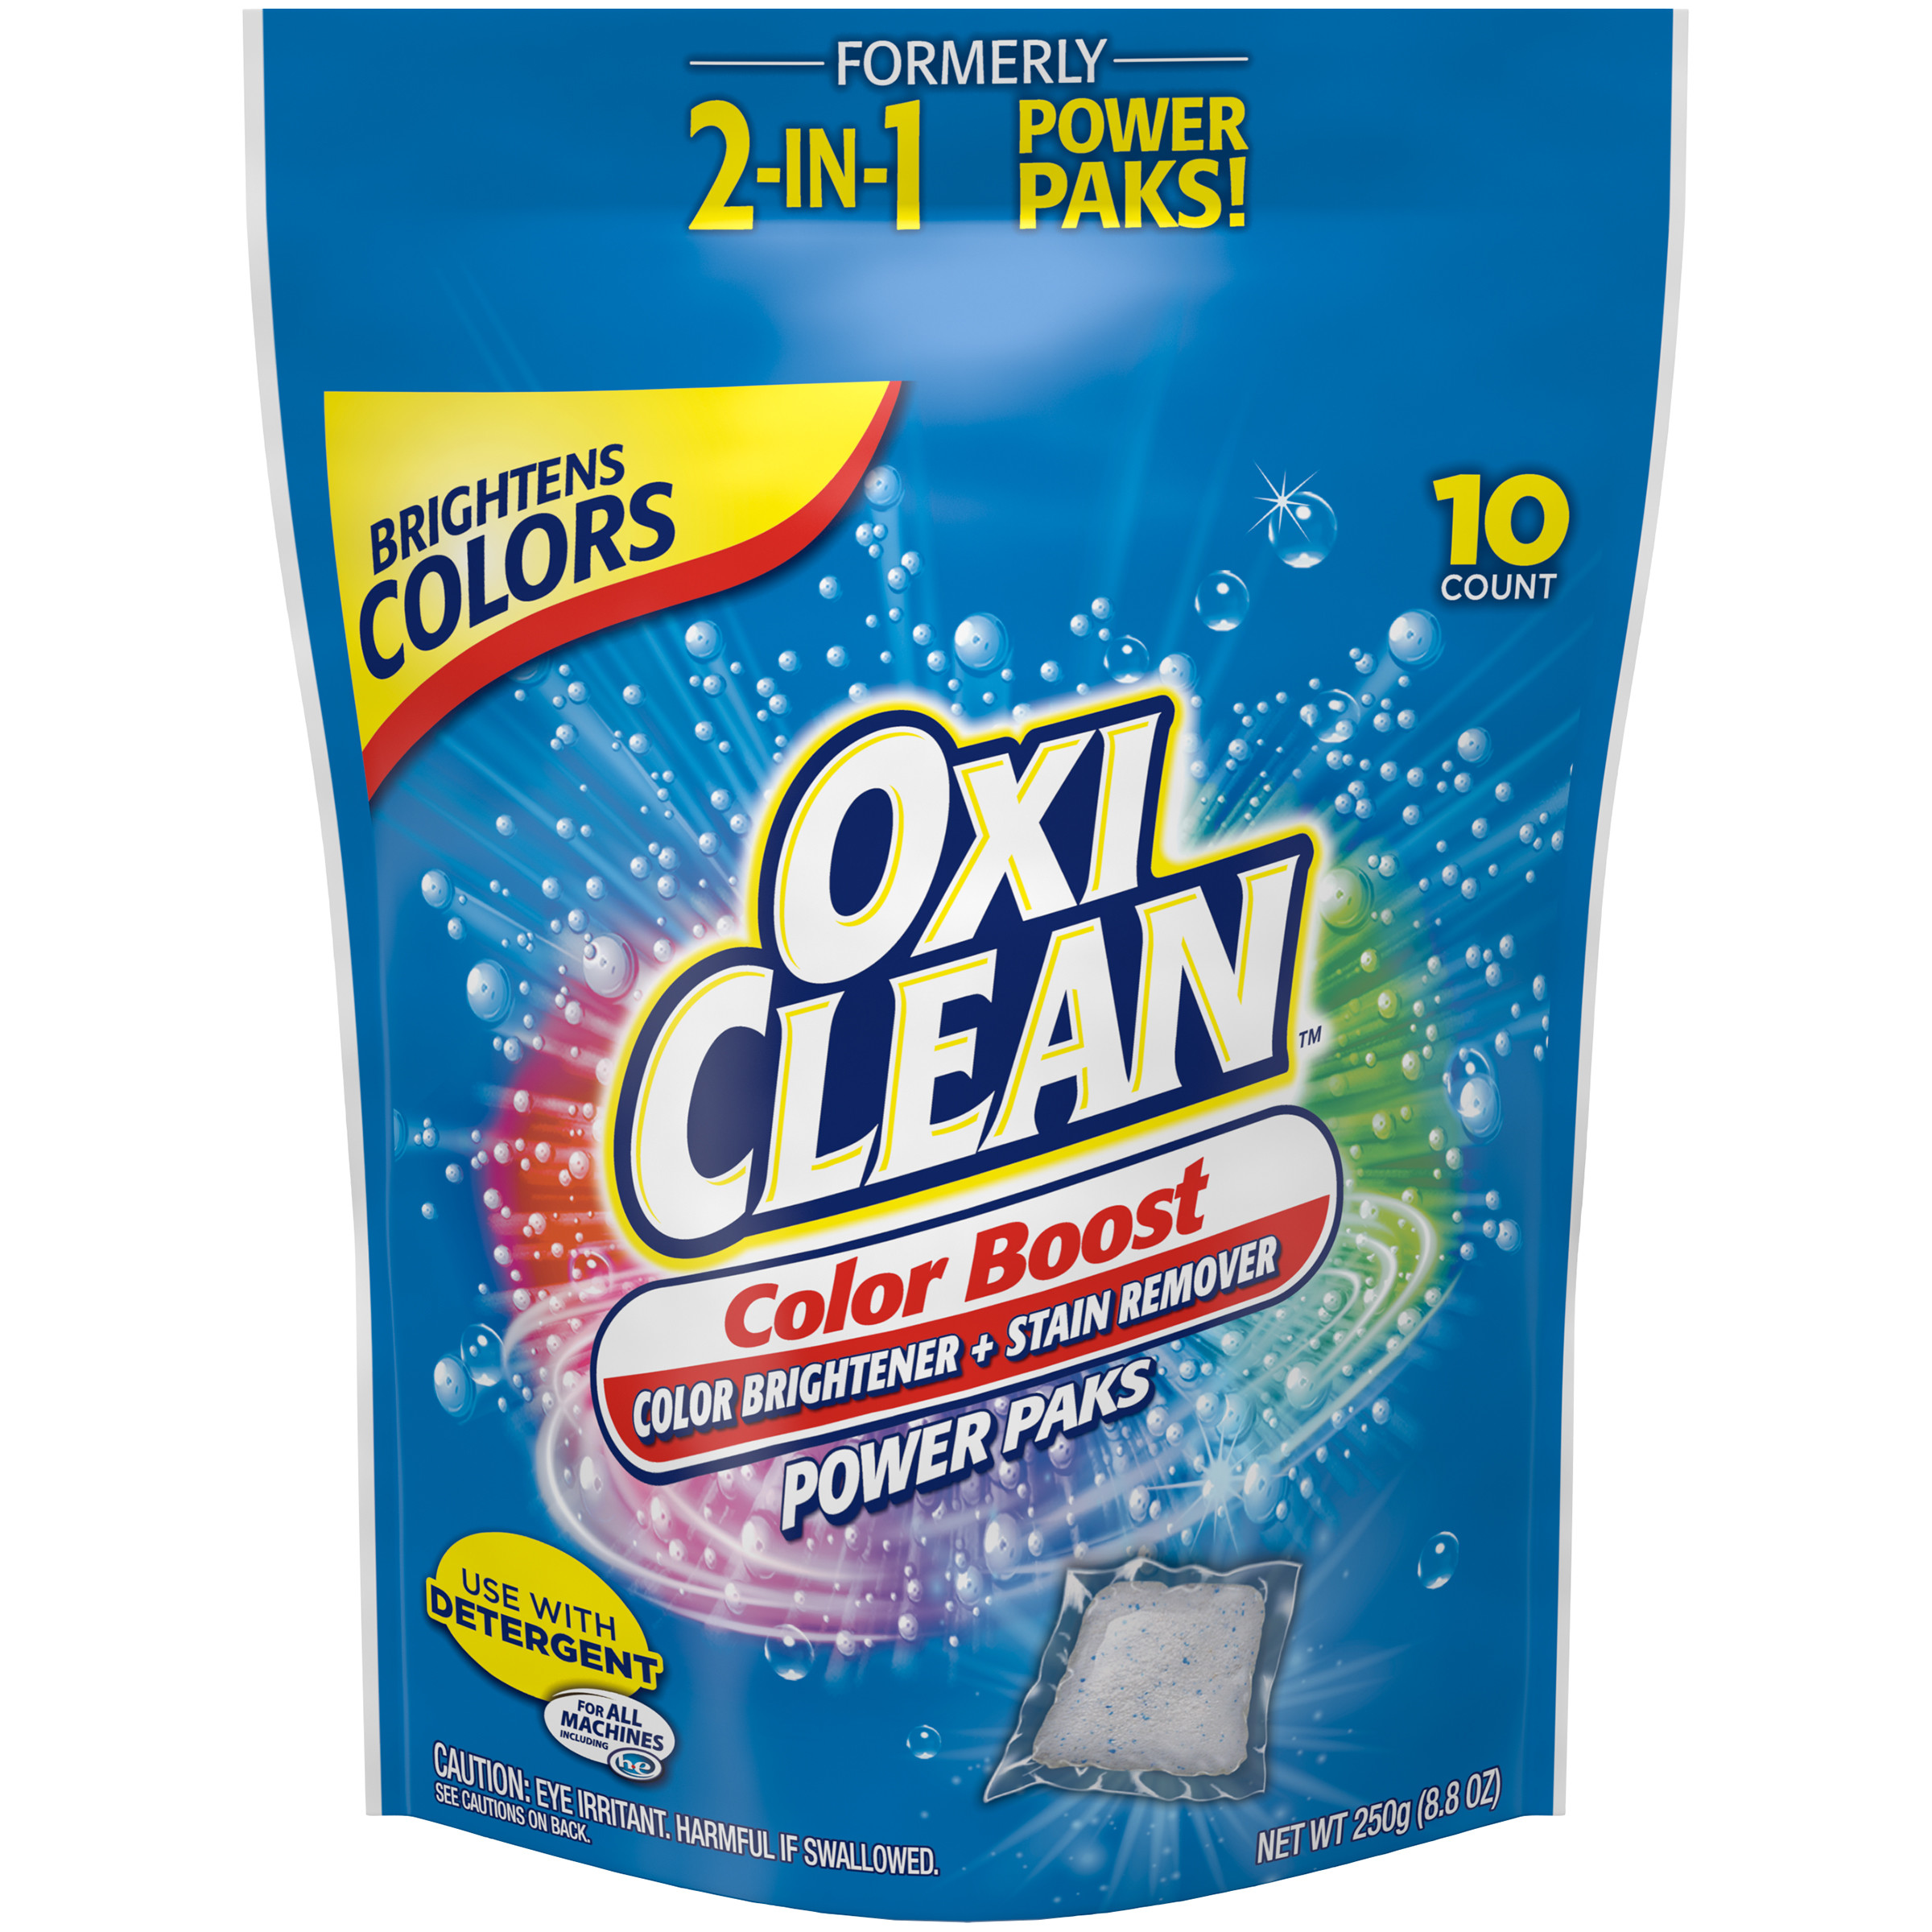 OxiClean Color Boost Color Brightener plus Stain Remover Power Paks, 10